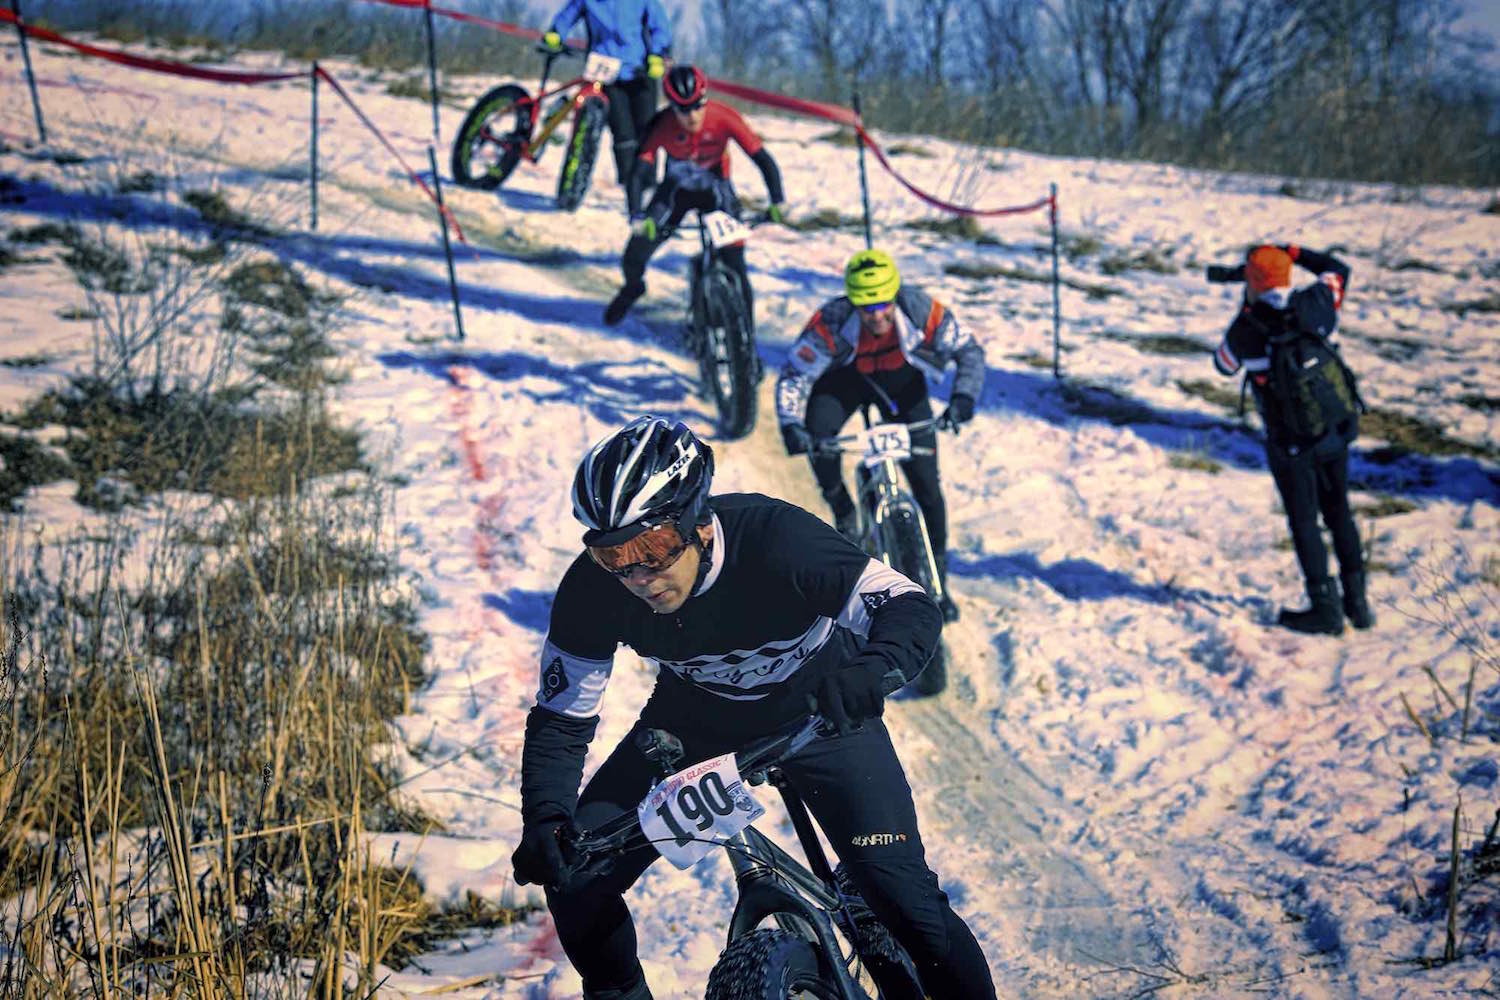 Fat bike racers tackle a slippery descent during the Fat Cupid Classic.